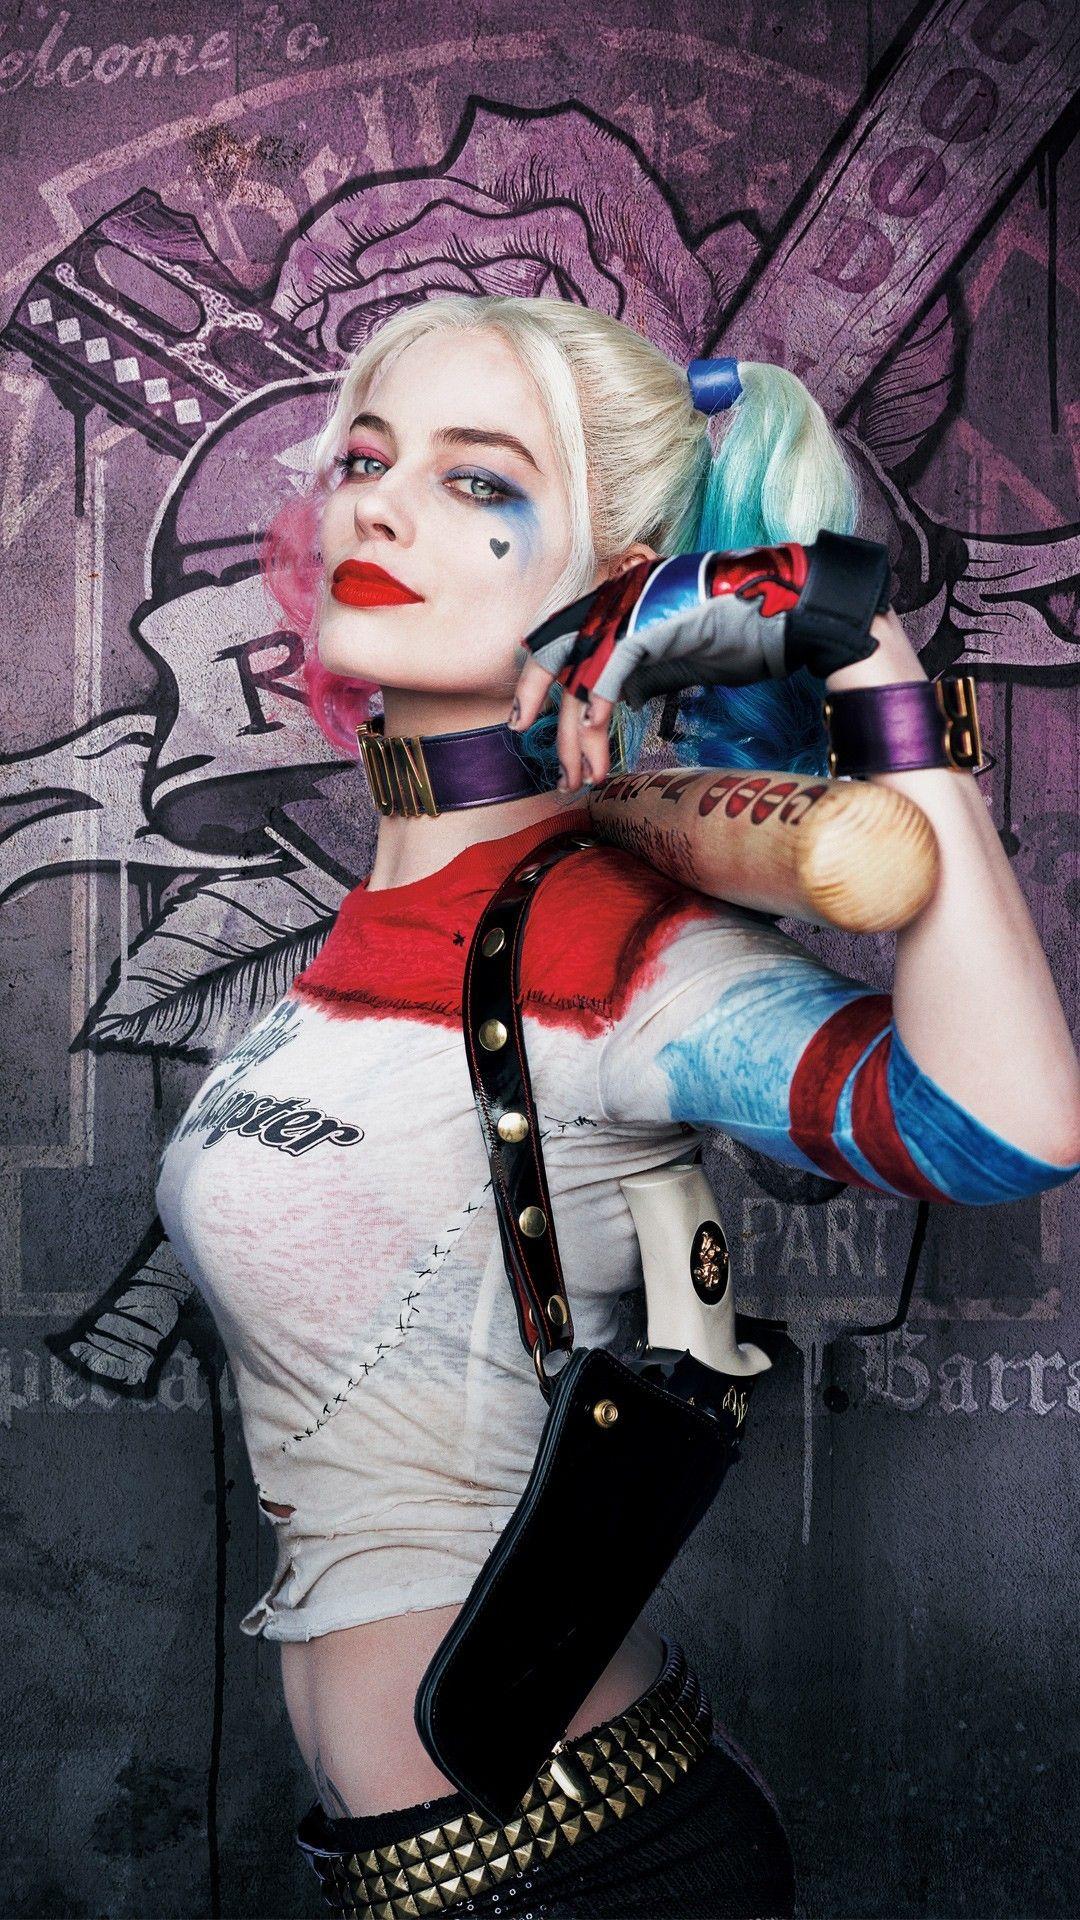 Suicide Squad Harley Quinn Phone Wallpaper Free Suicide